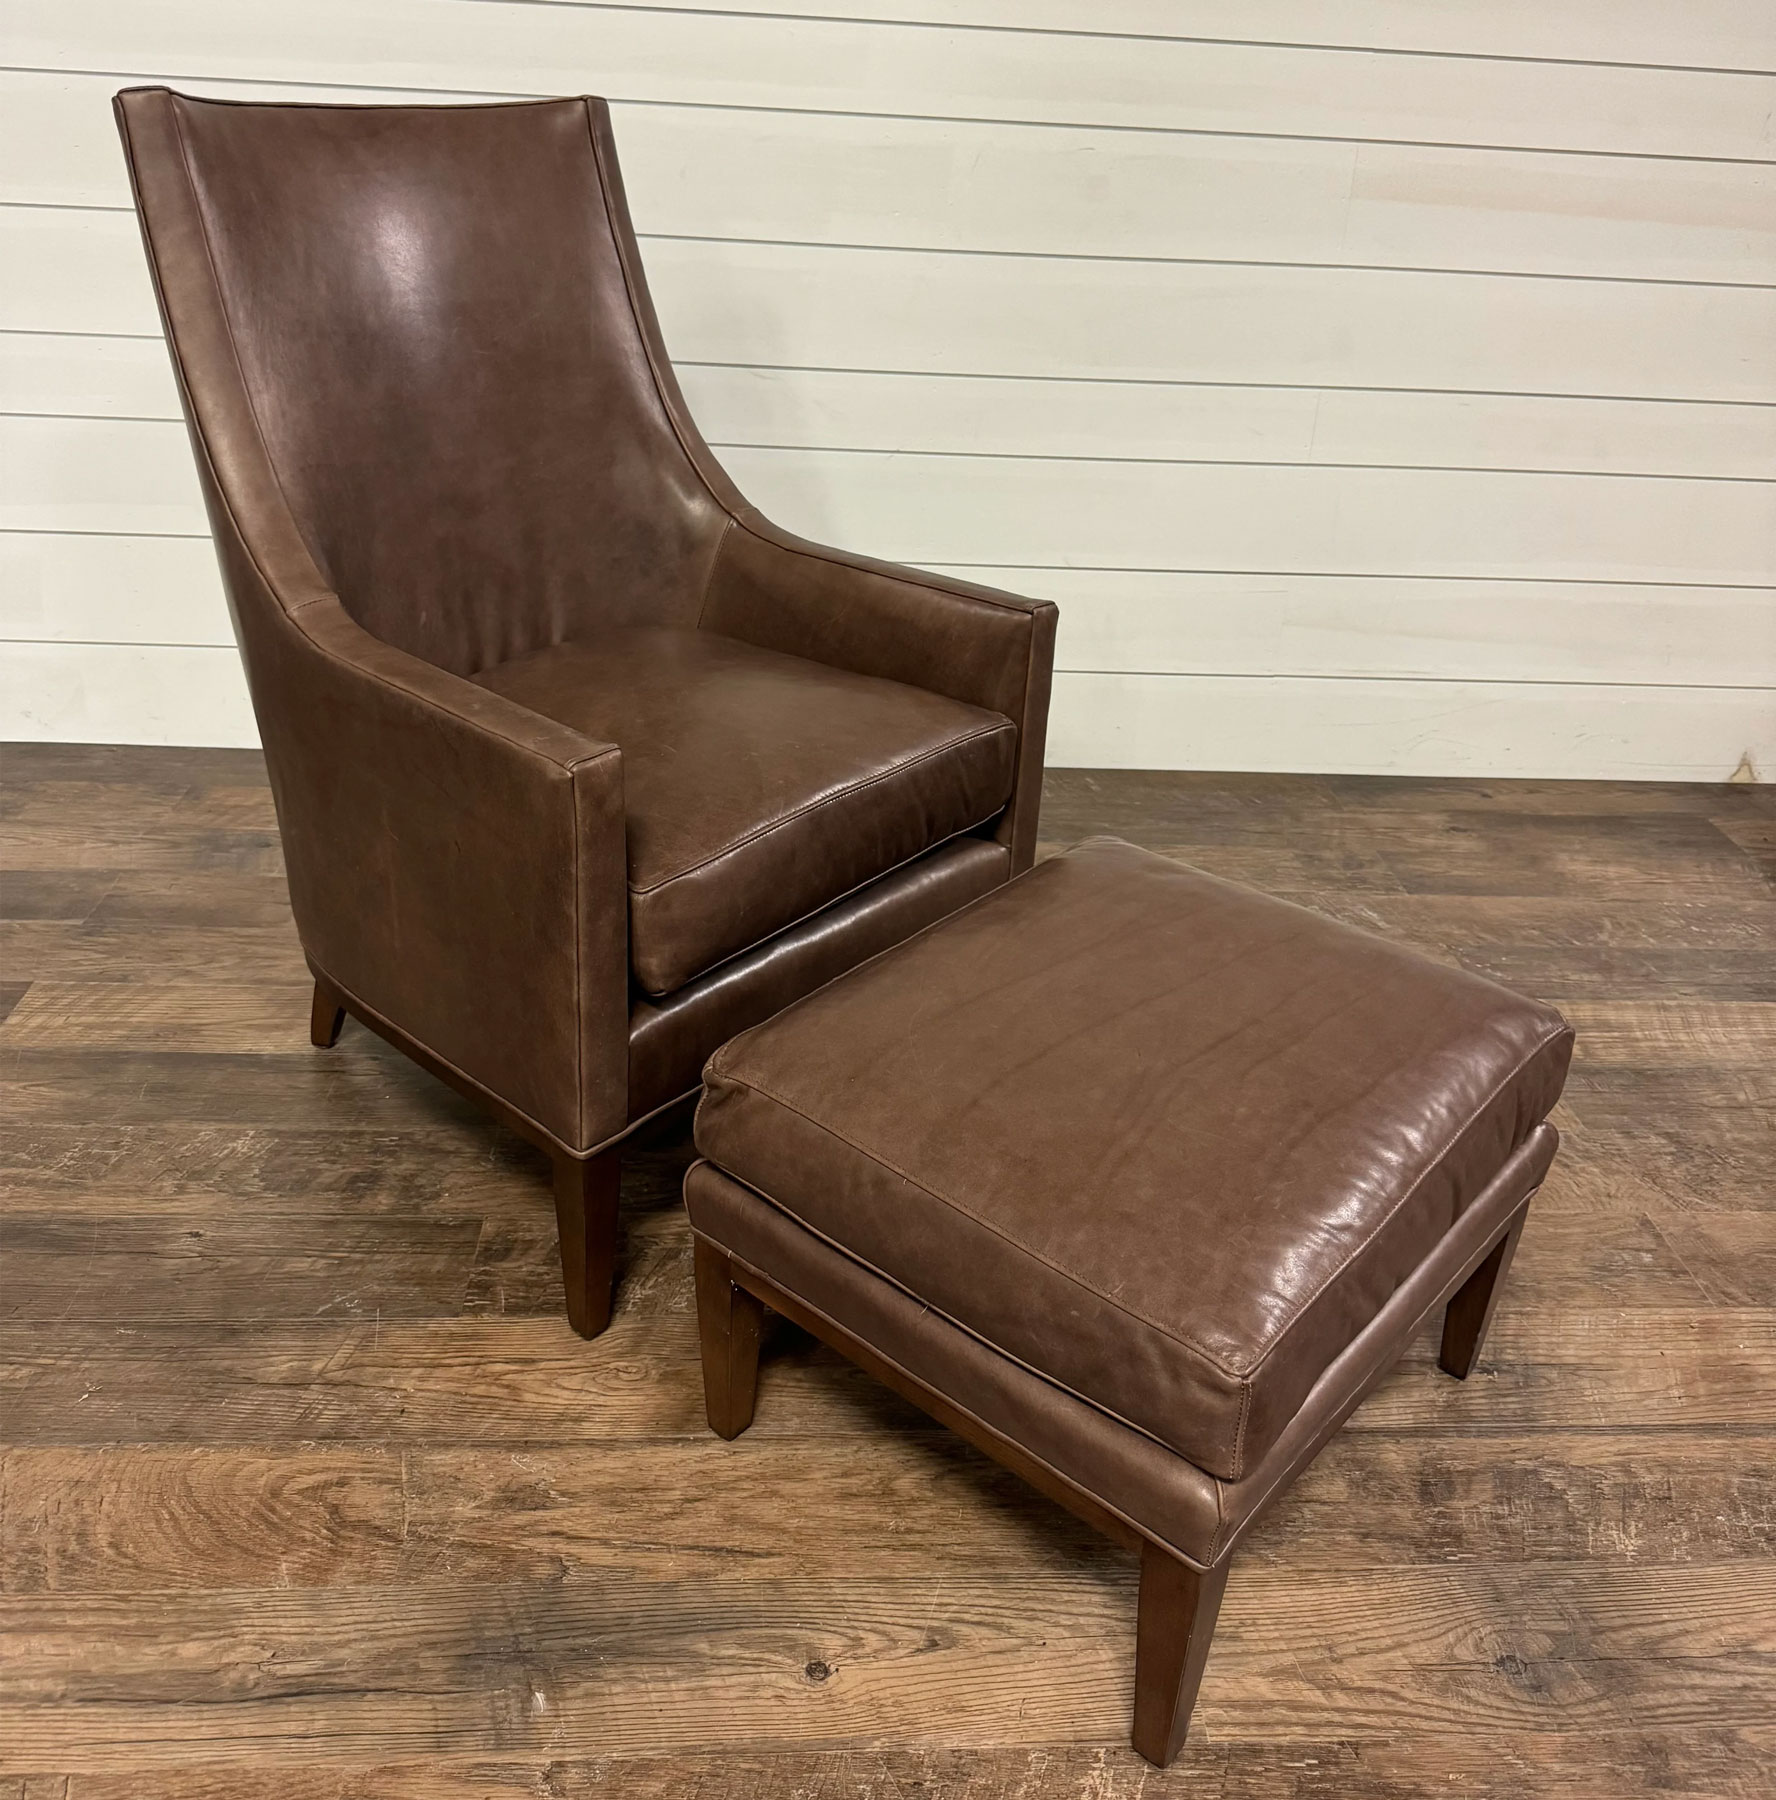 Wesley Hall L504 Quayden Chair and Ottoman in Madrid Dove Leather